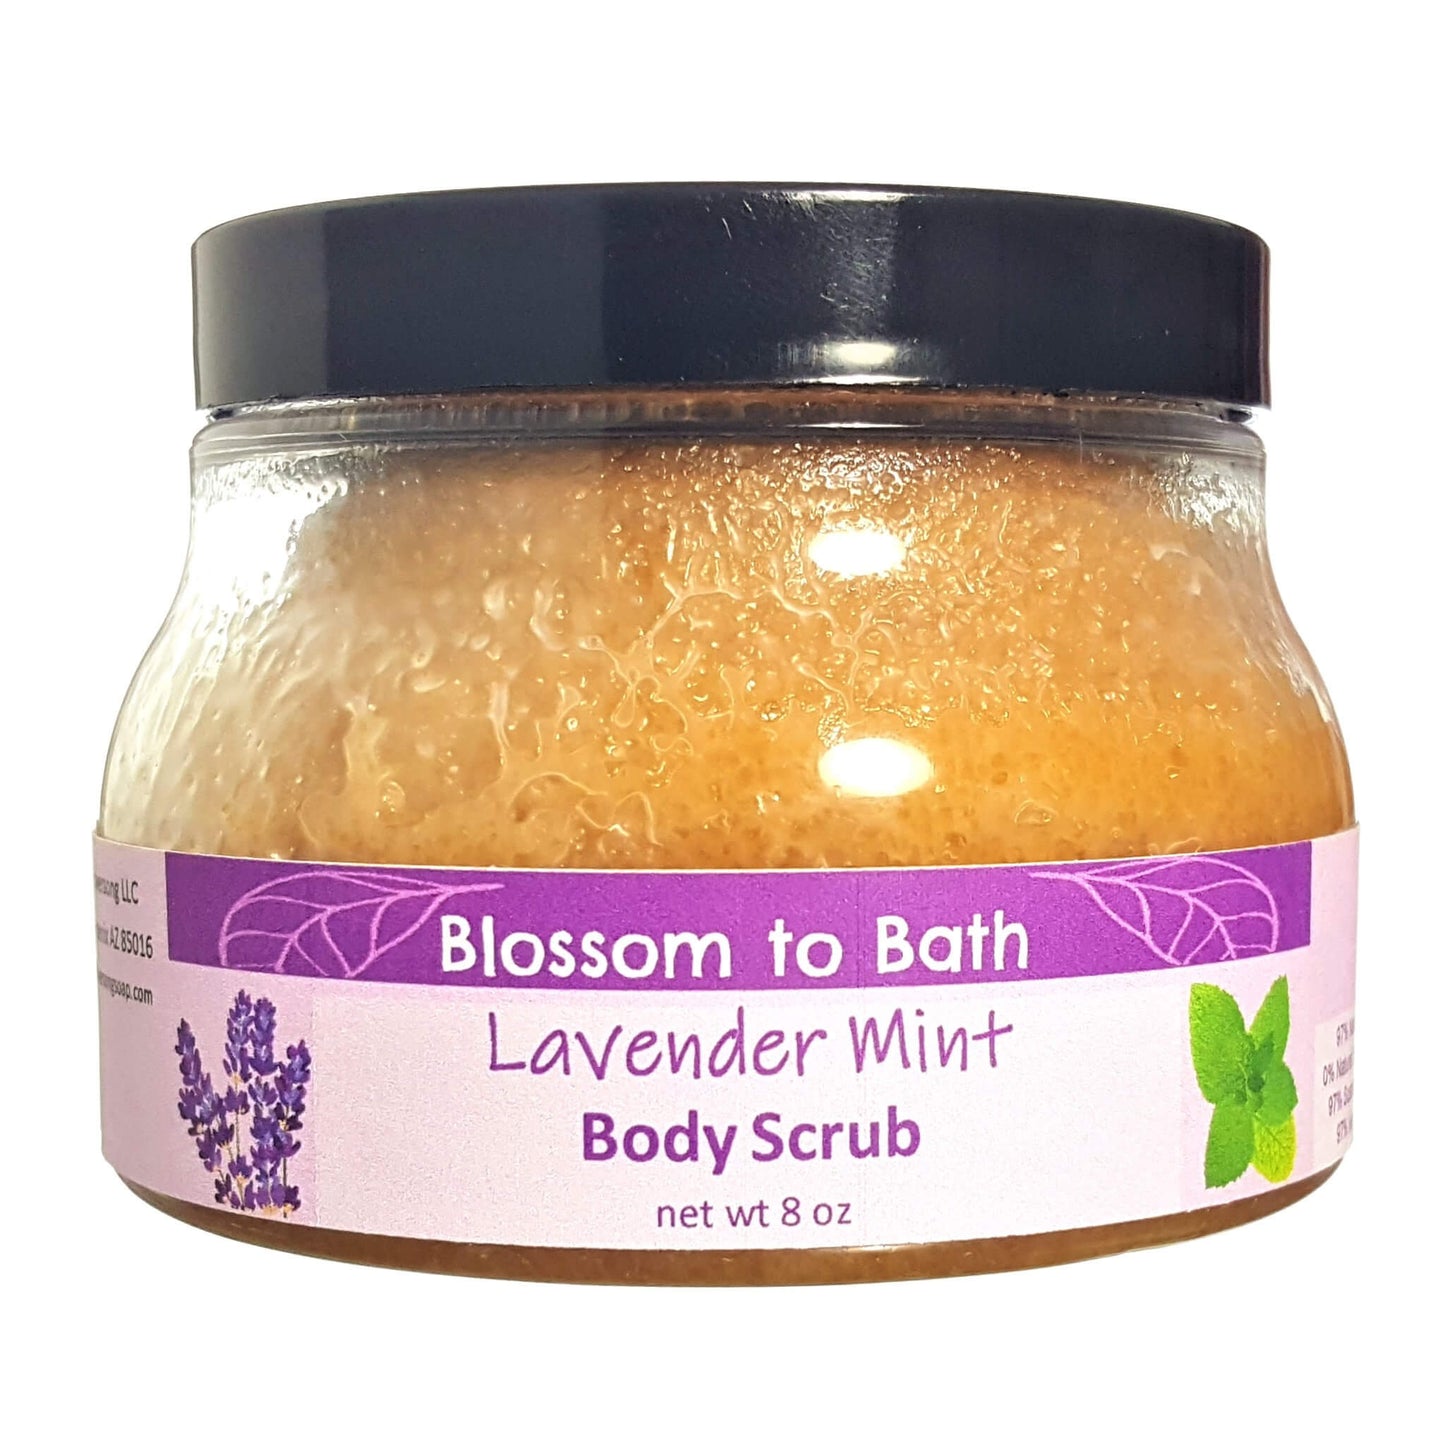 Buy Blossom to Bath Lavender Mint Body Scrub from Flowersong Soap Studio.  Large crystal turbinado sugar plus luxury rich oils conveniently exfoliate and moisturize in one step  A cheerfully relaxing combination of lavender and peppermint.